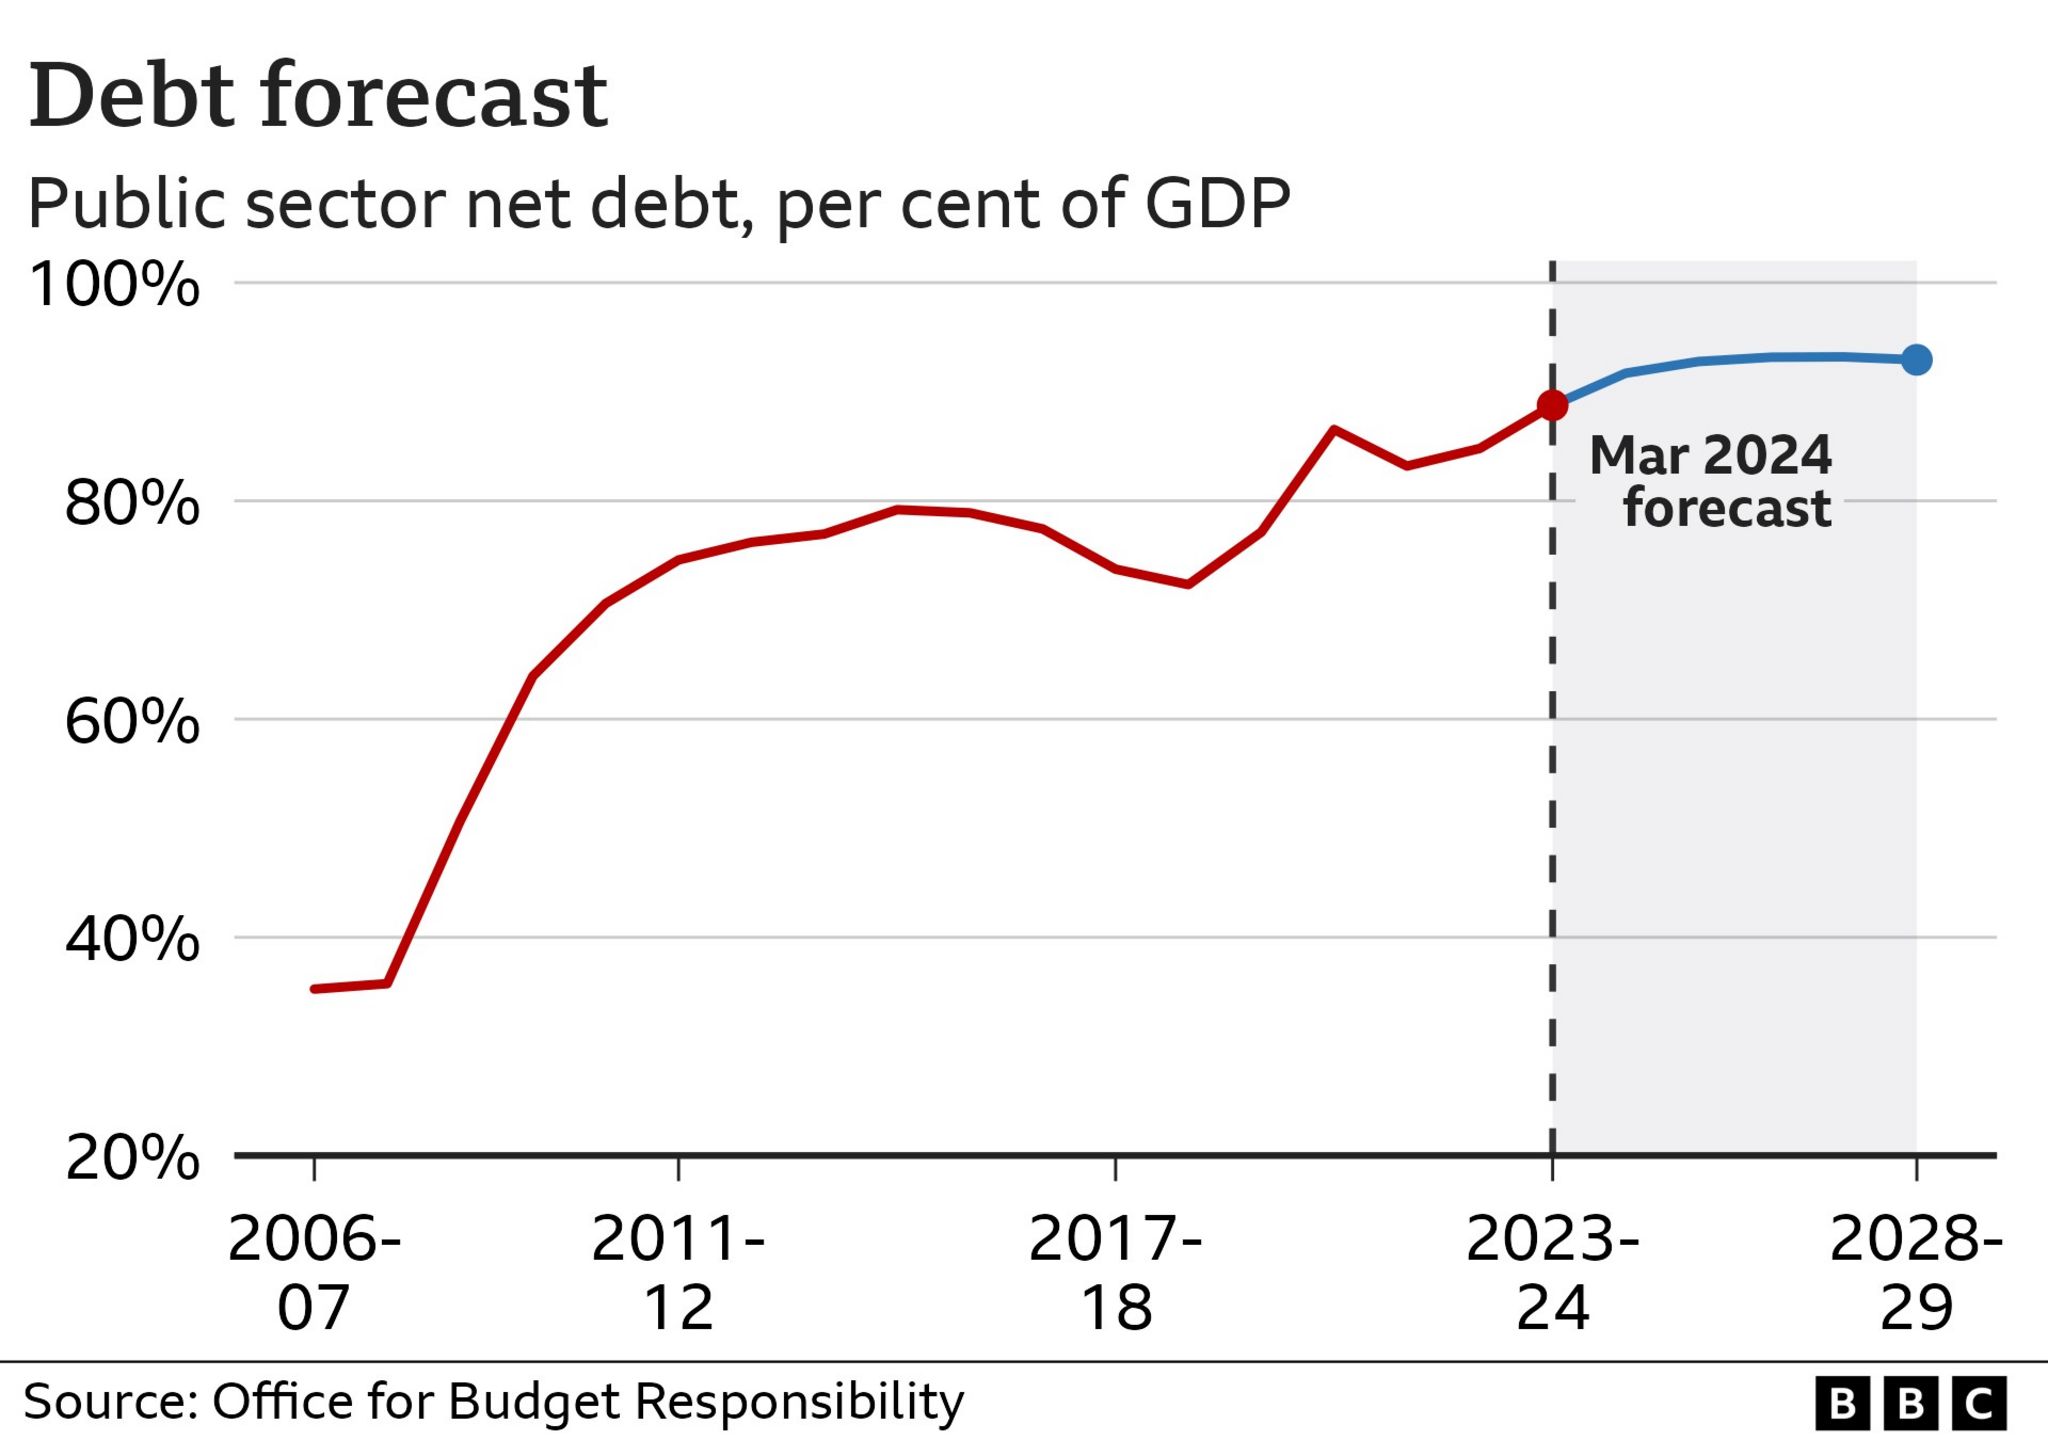 Graphic showing public sector net debt as a percentage of GDP